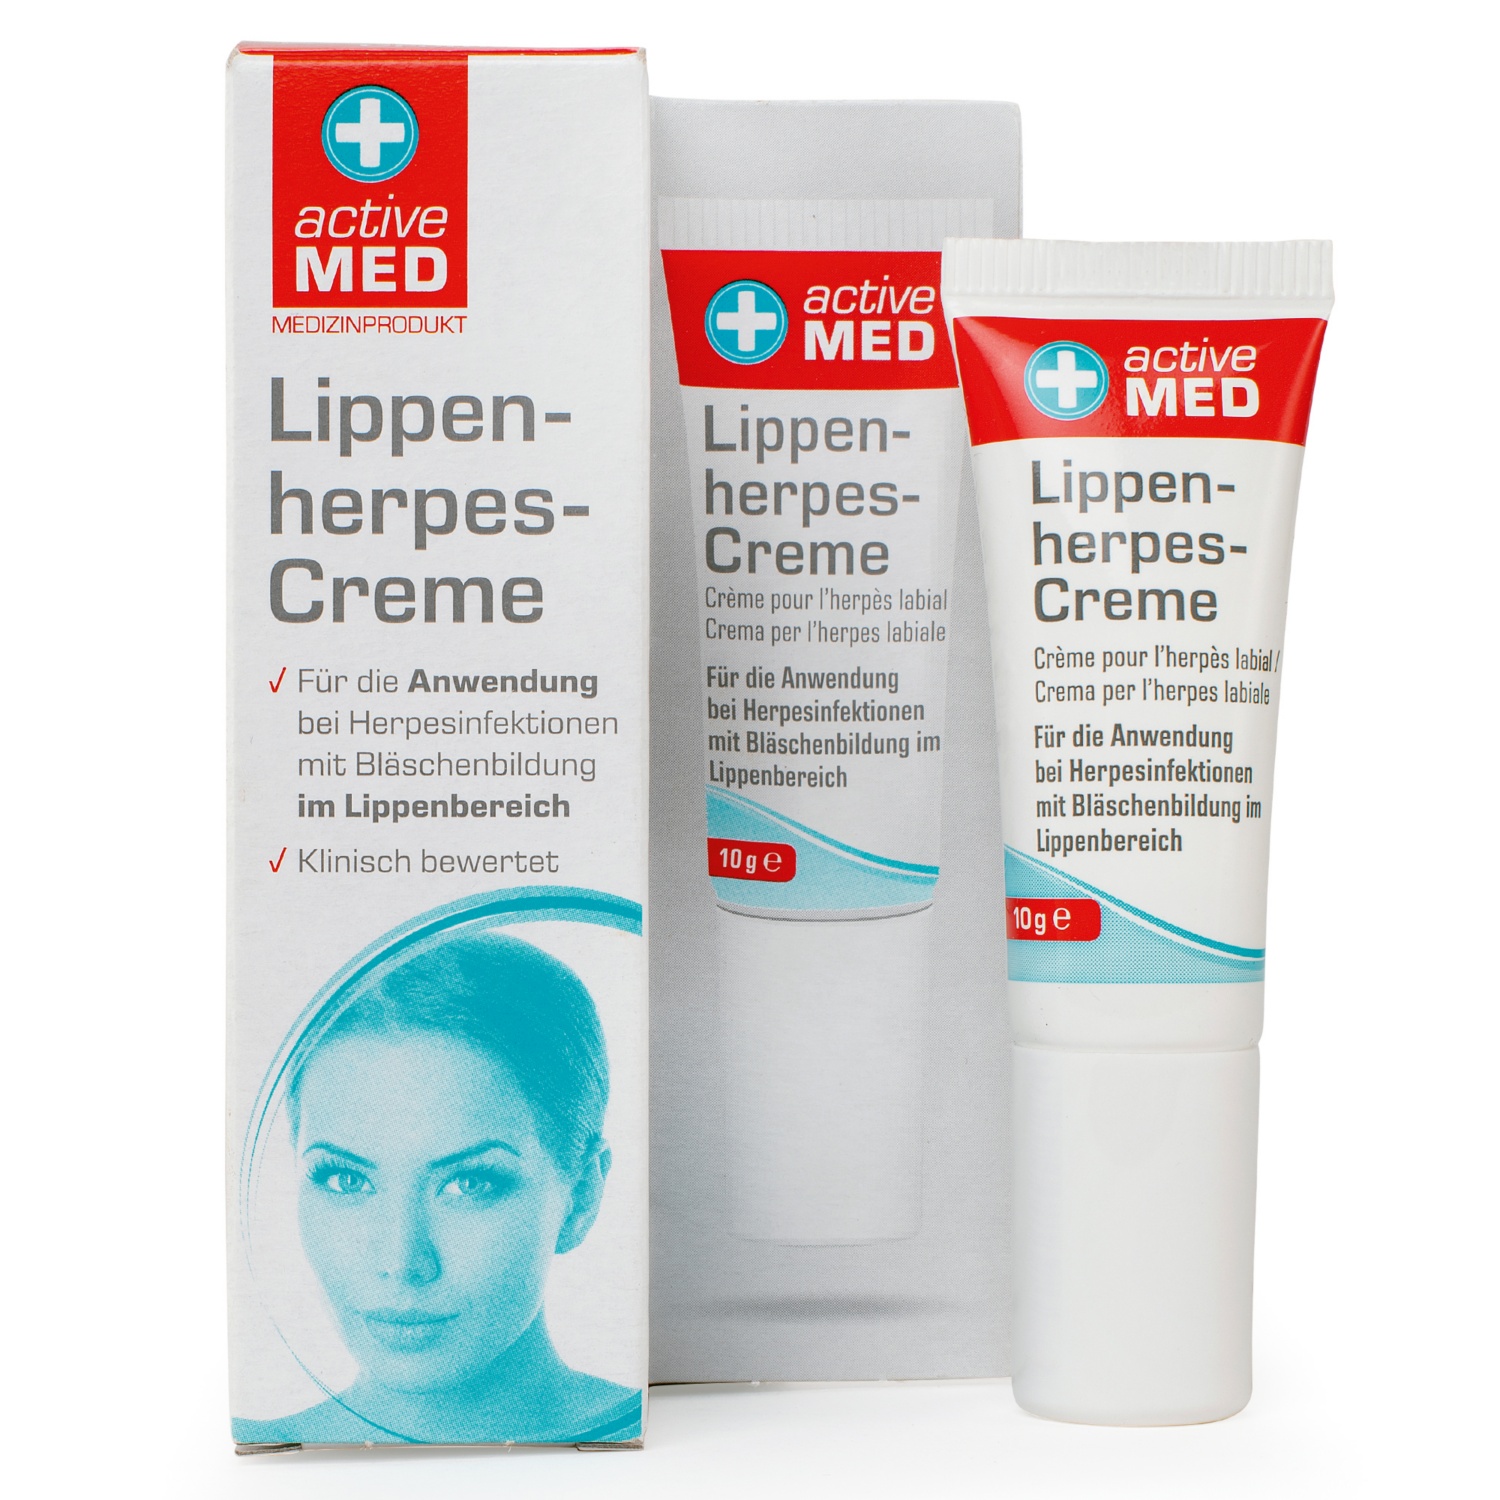 ACTIVE MED Lippenherpes-Creme